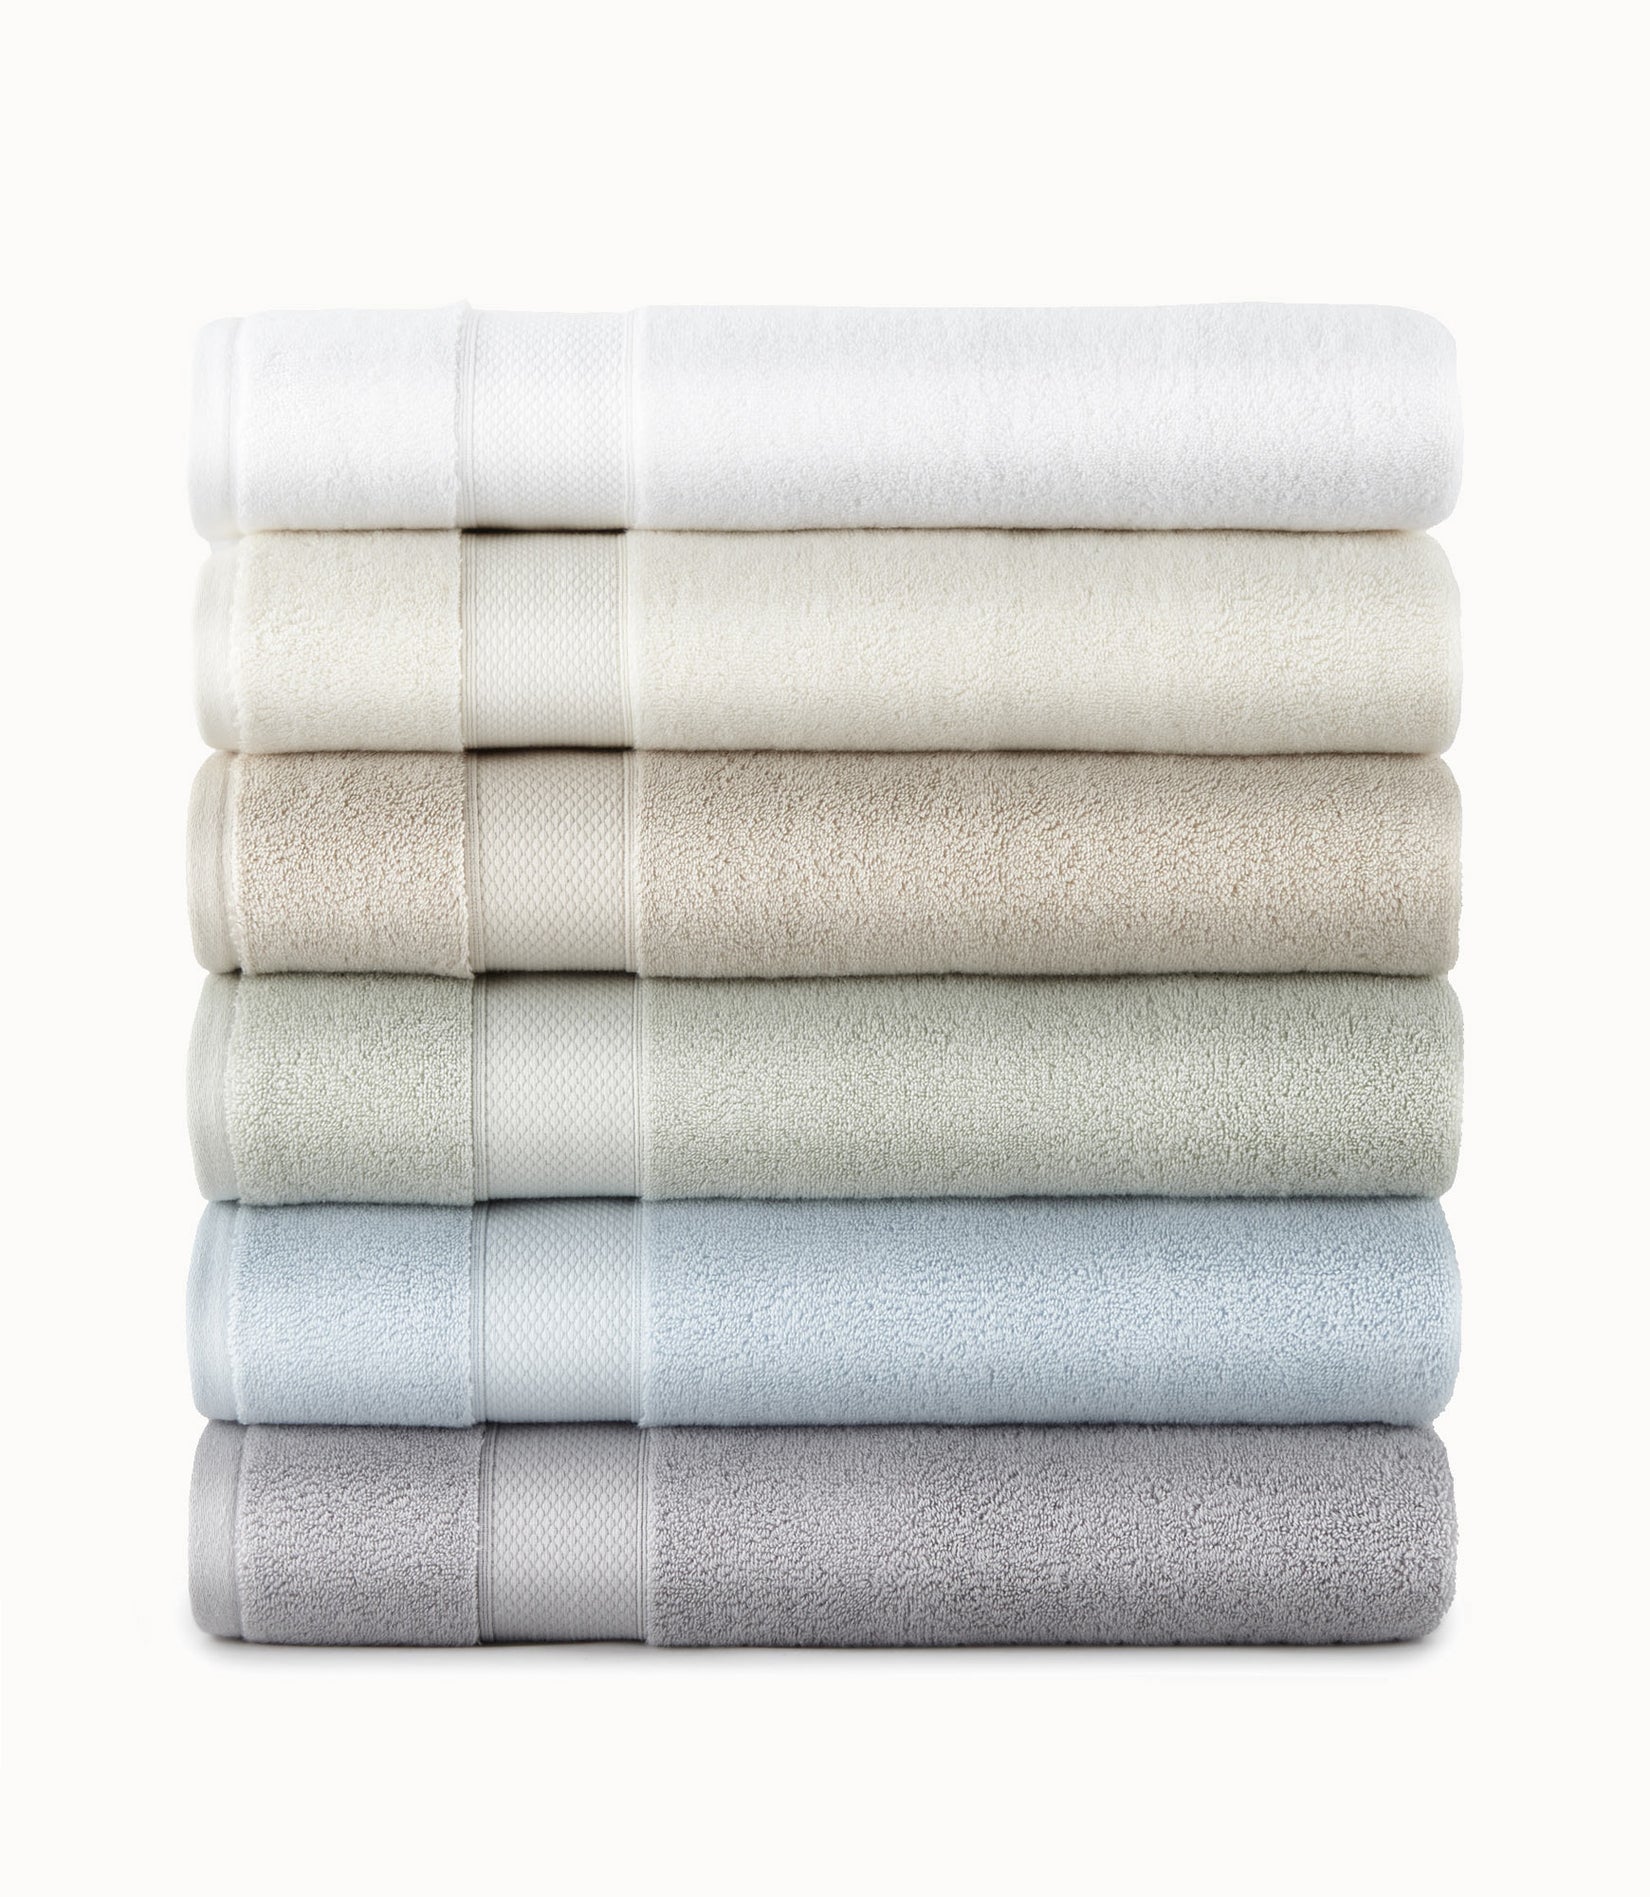 Luxurious Bath Towels for Every Style | Peacock Alley